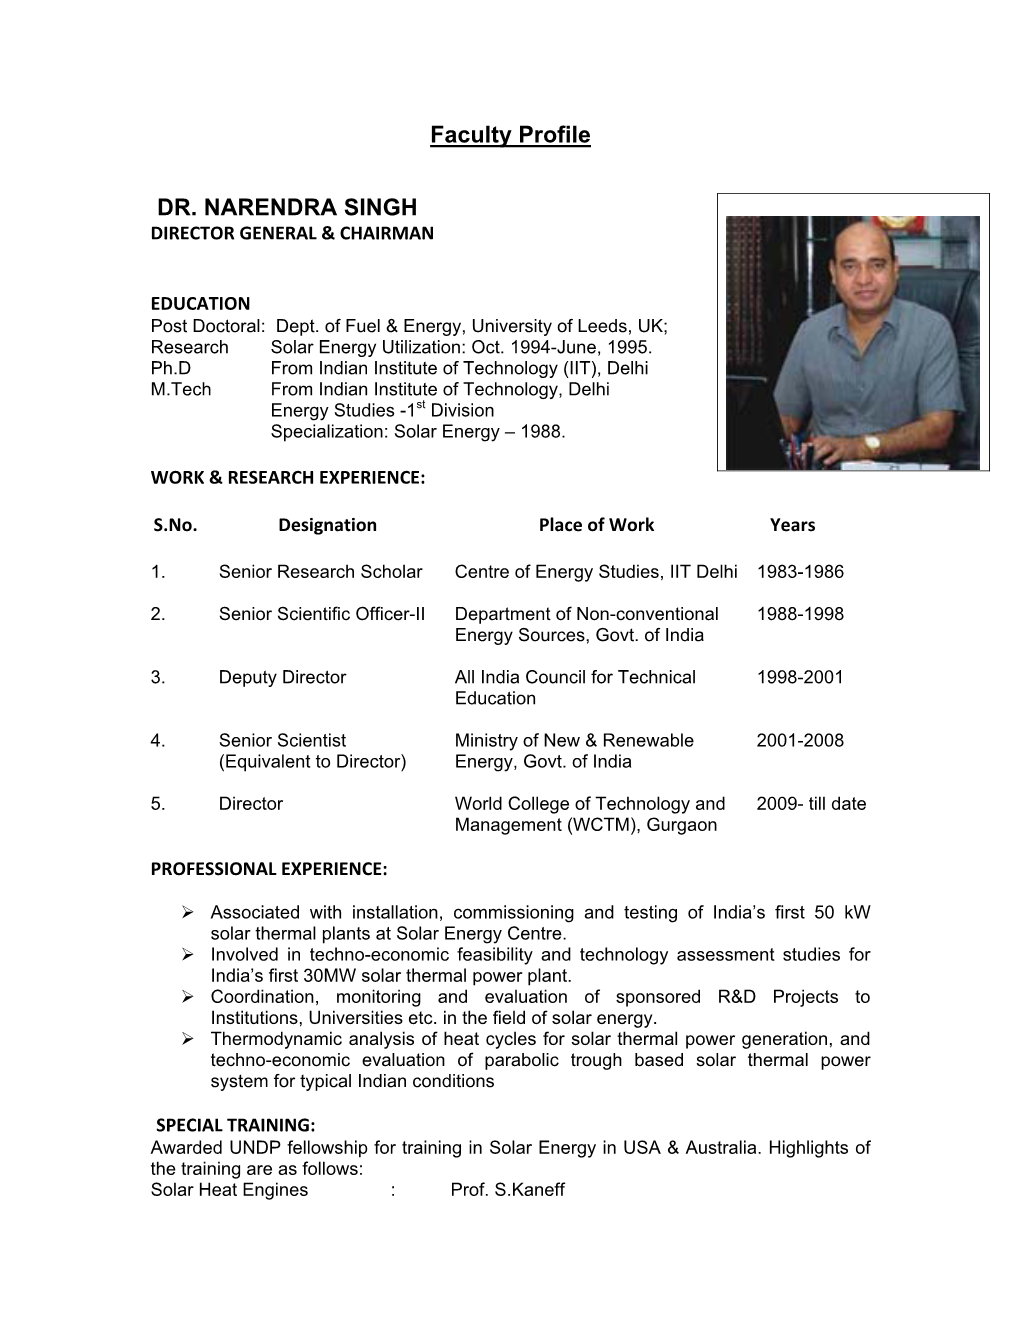 Faculty Profile DR. NARENDRA SINGH